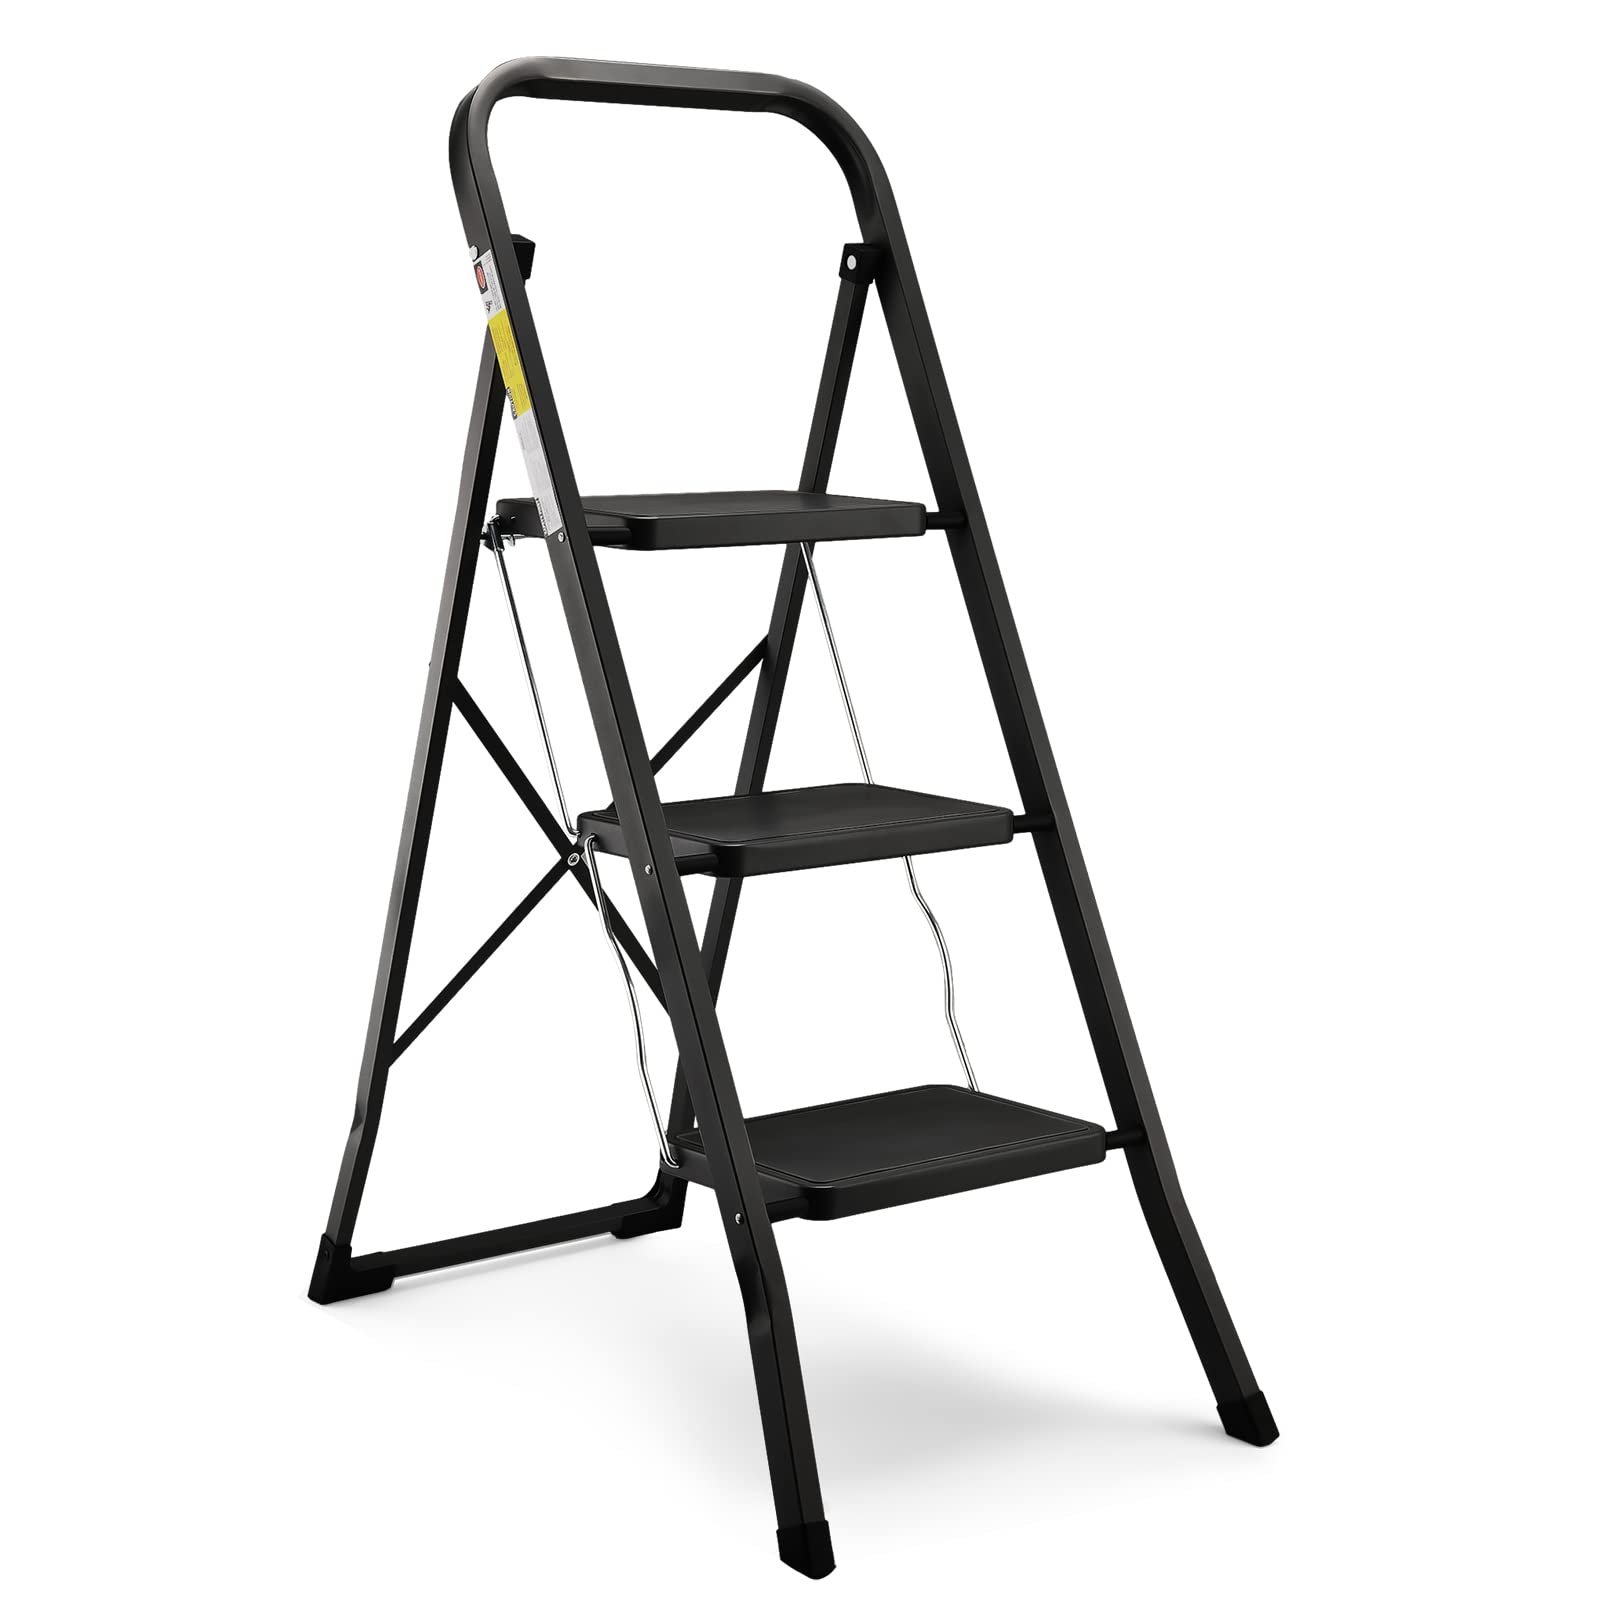 Soctone 3 Step Ladder, Lightweight Folding Step Stools for Adults with Anti-Slip Pedal, Portable Sturdy Steel Ladder with Handrails, Per